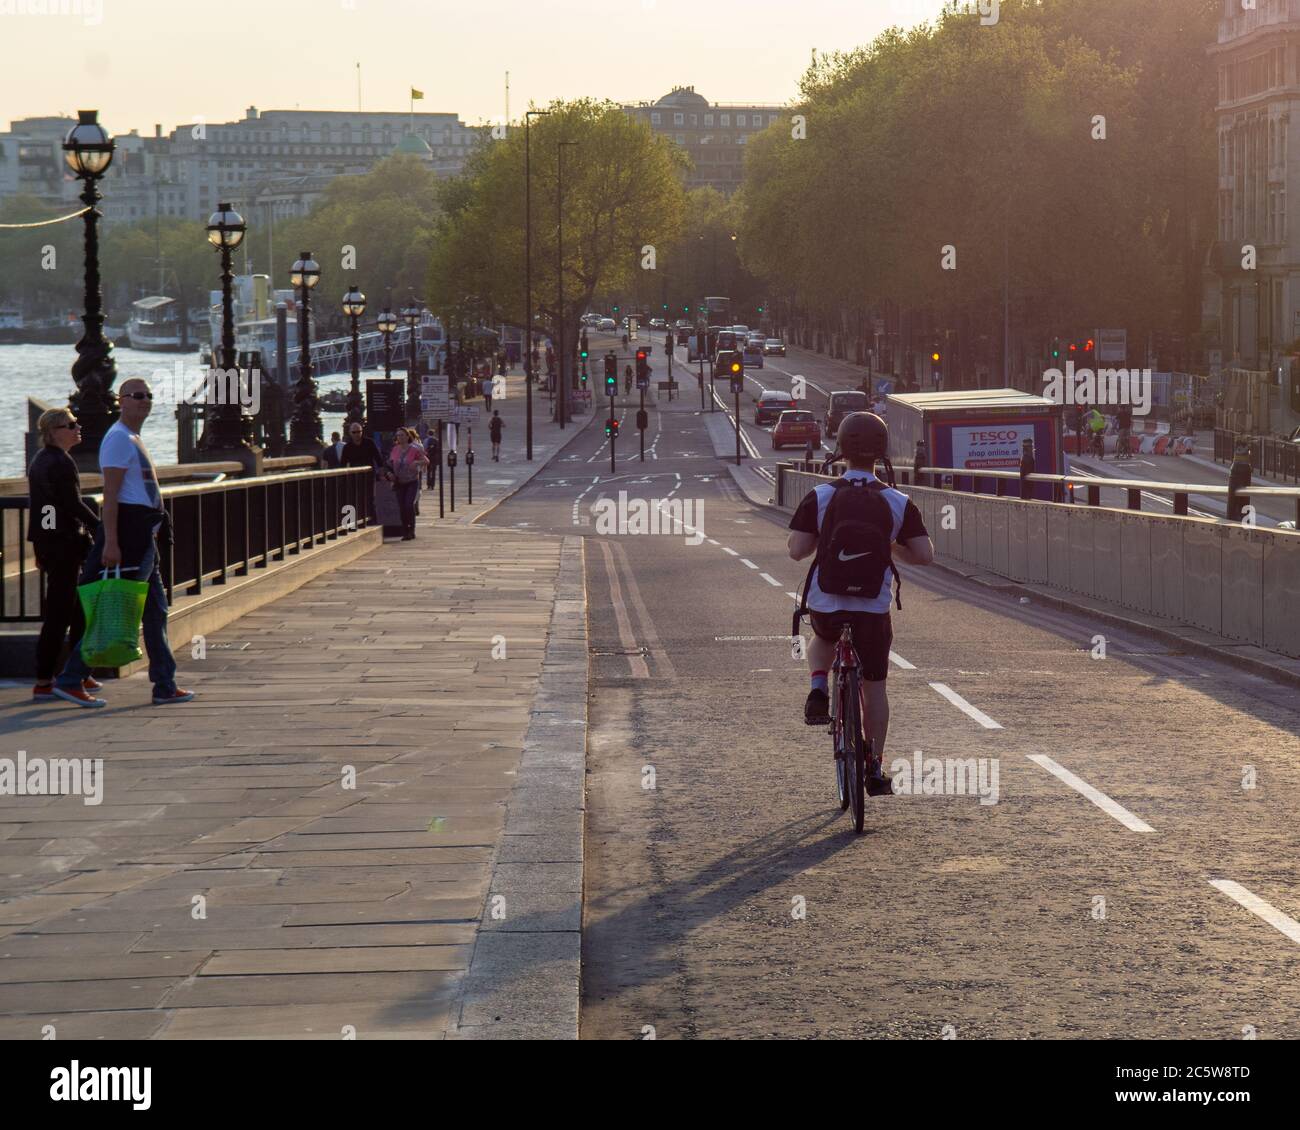 Cyclists, pedestrians and traffic move along the Thames Embankment on a sunny evening in London. Stock Photo